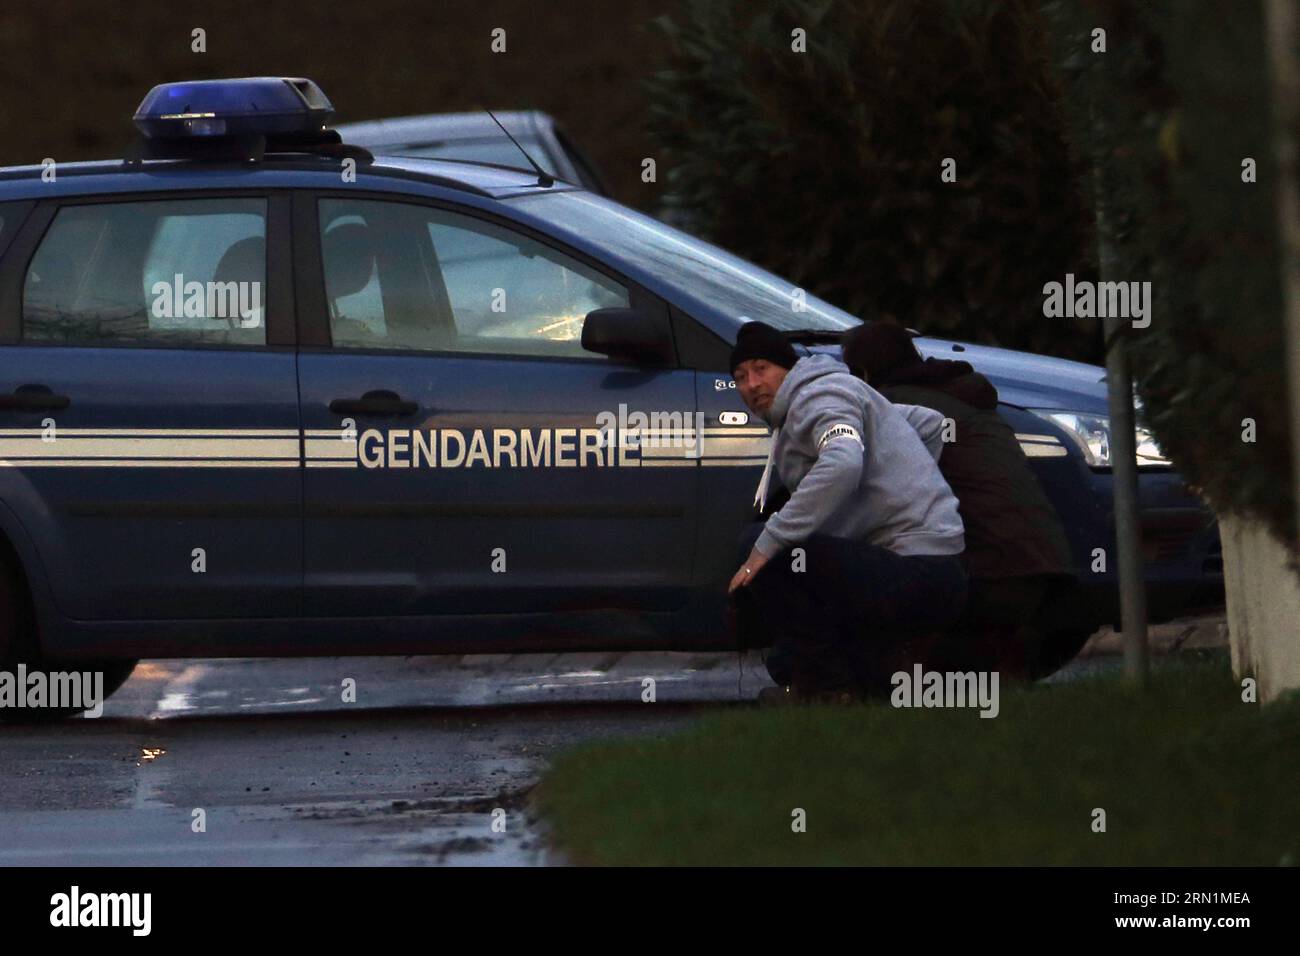 Two plainclothes hide behind a police car in Dammartin-en-Goele, northeast of Paris, where two brothers suspected of Charlie Hebdo attack held one person hostage as police cornered the gunmen, on Jan. 9, 2015. The Kouachi brothers, suspects of Charlie Hebdo attacks, were killed during French security force s assault on Friday evening, and the hostages are alive. ) FRANCE-DAMMARTIN-EN-GOELE-CHARLIE-SUSPECTS-ASSAULT-OPERATION RaoulxChombier PUBLICATIONxNOTxINxCHN   Two plainclothes HIDE behind a Police Car in  en  Northeast of Paris Where Two Brothers suspected of Charlie Hebdo Attack Hero One P Stock Photo